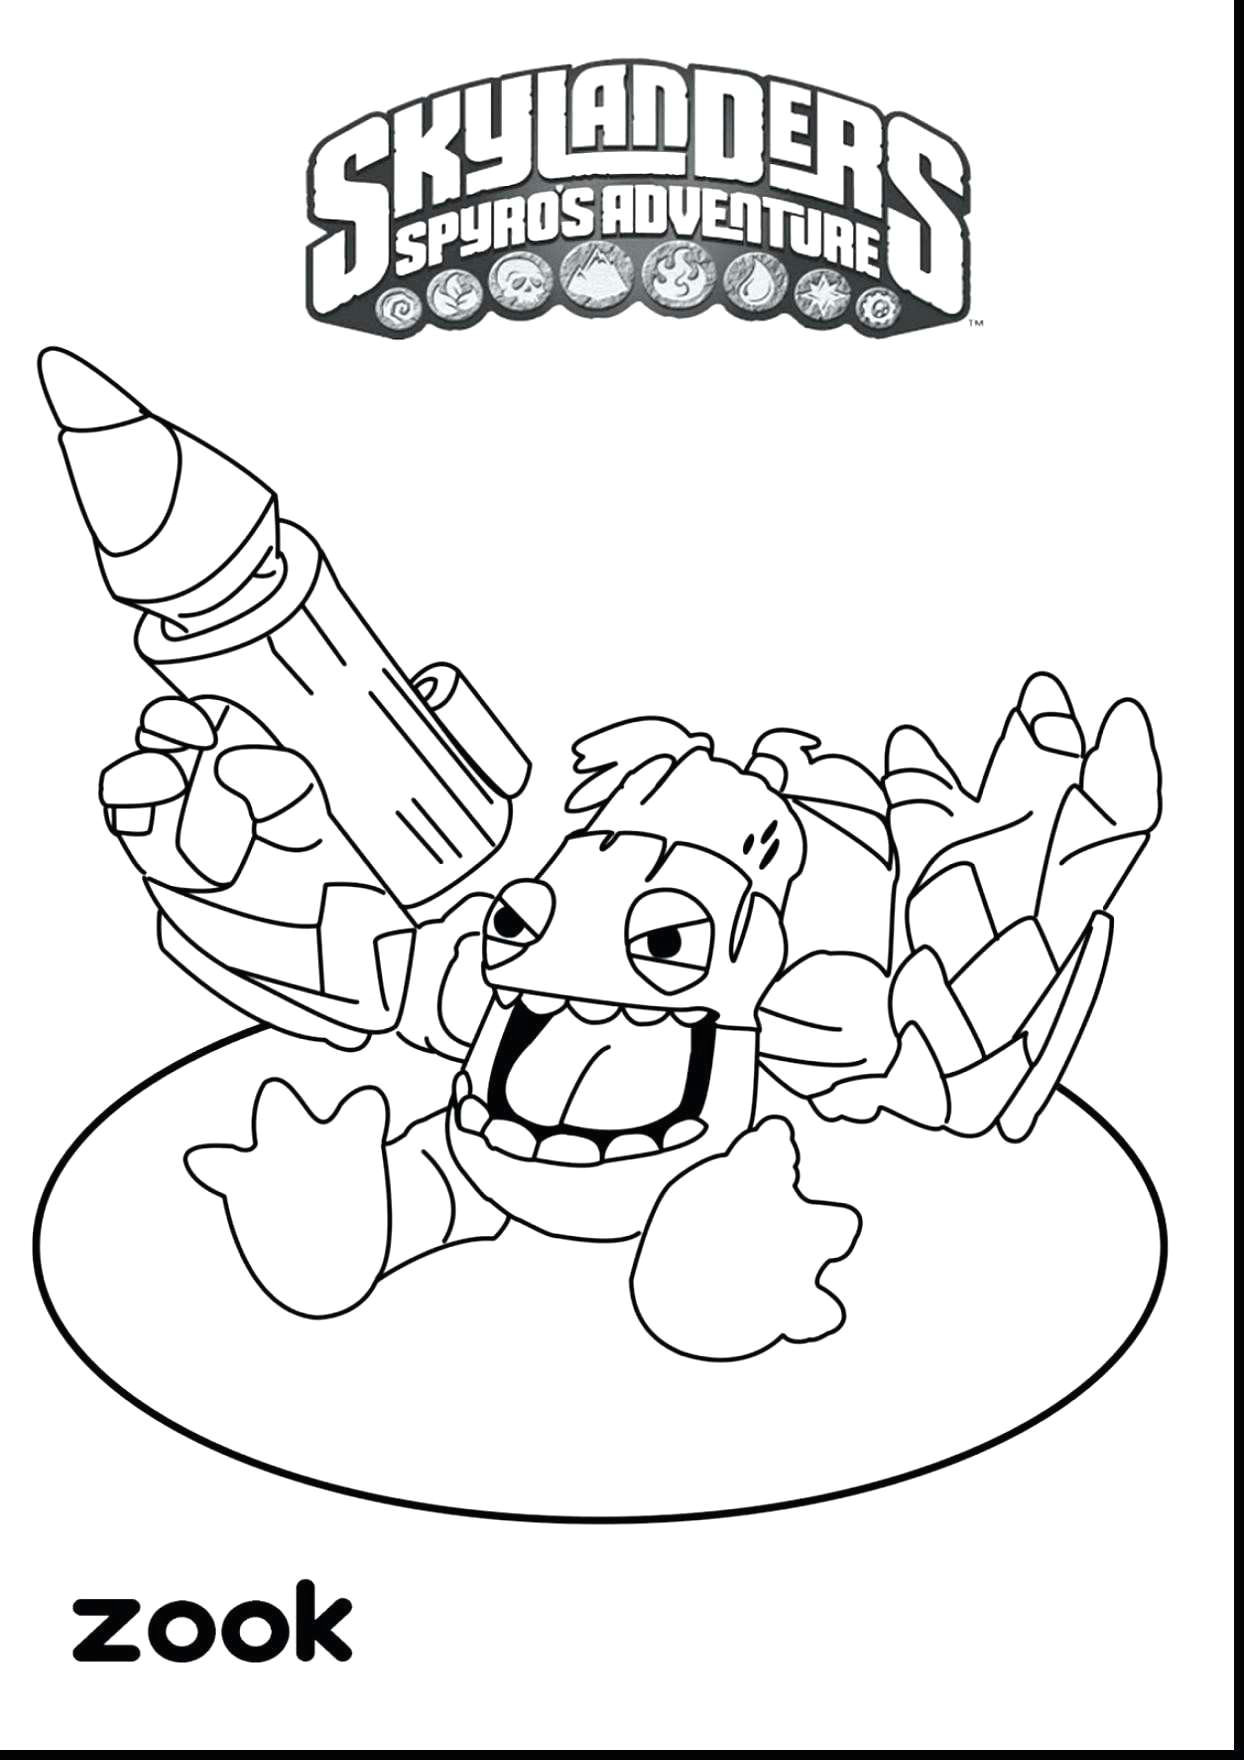 coloring pages to color fresh drawings to color best color page new children colouring 0d